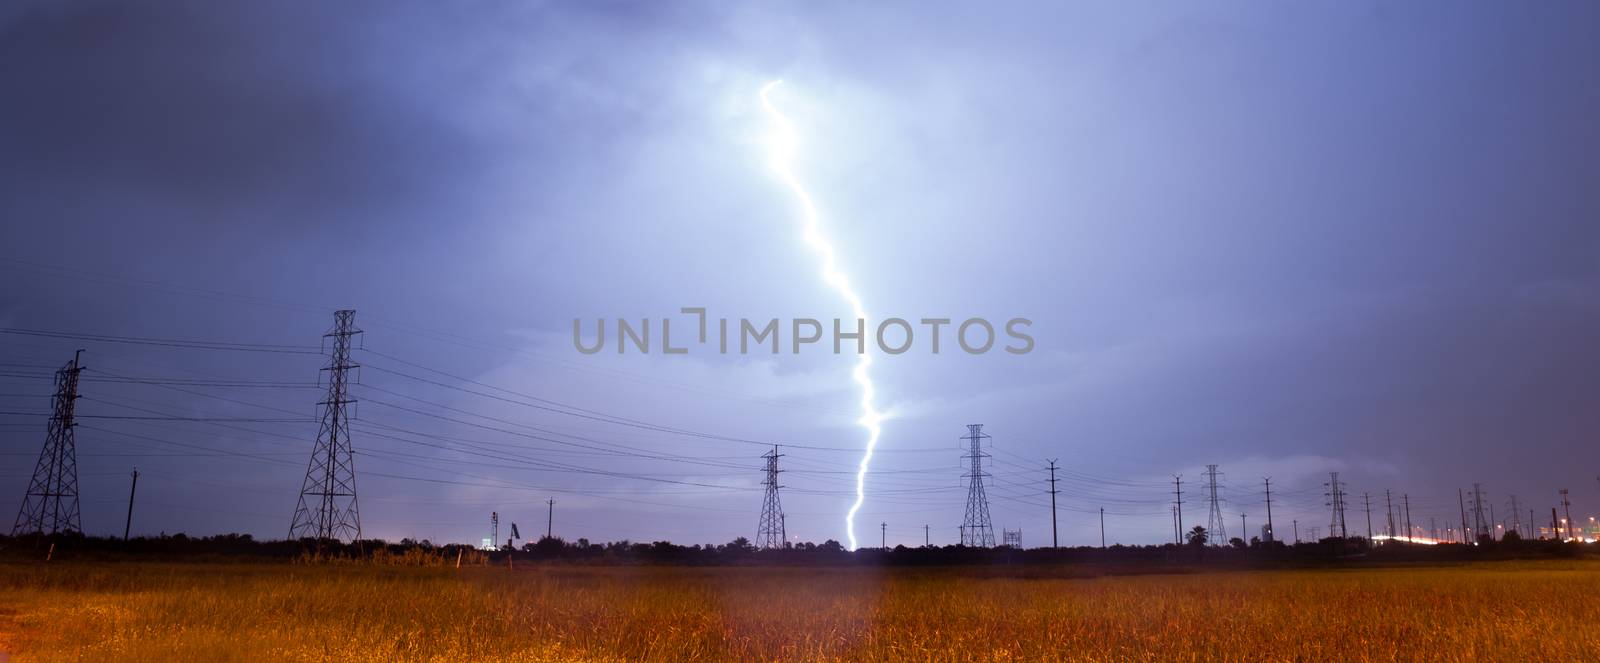 Electrical Storm Thunderstorm Lightning over Power Lines South Texas by ChrisBoswell